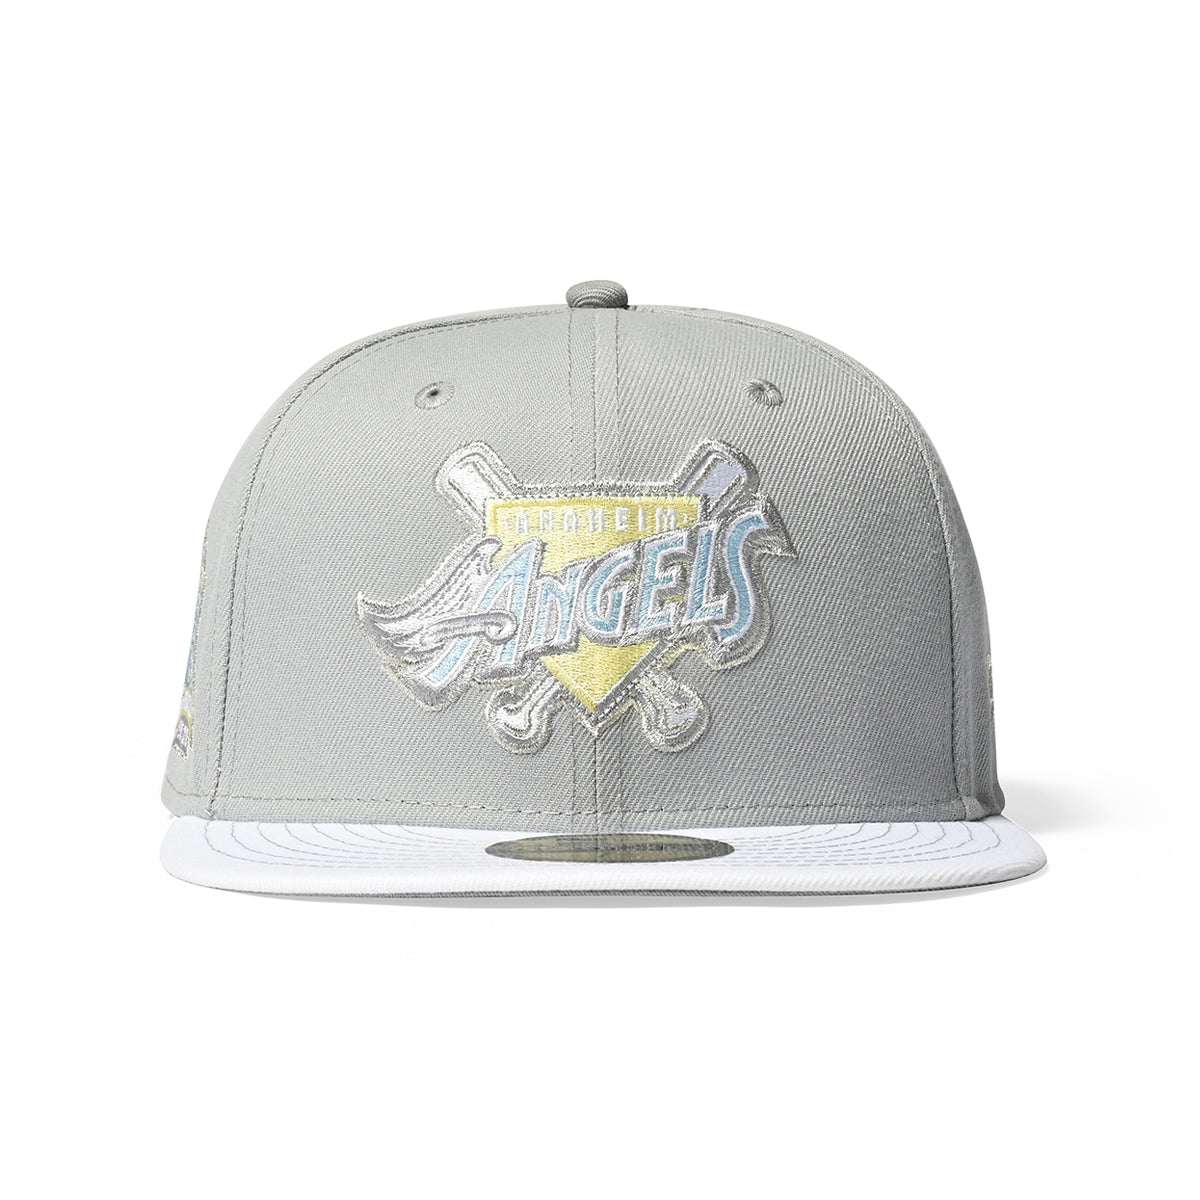 NEW ERA Anaheim Angels - 50th ANV 59FIFTY DOLPHIN GRAY/WHITE【70811961】